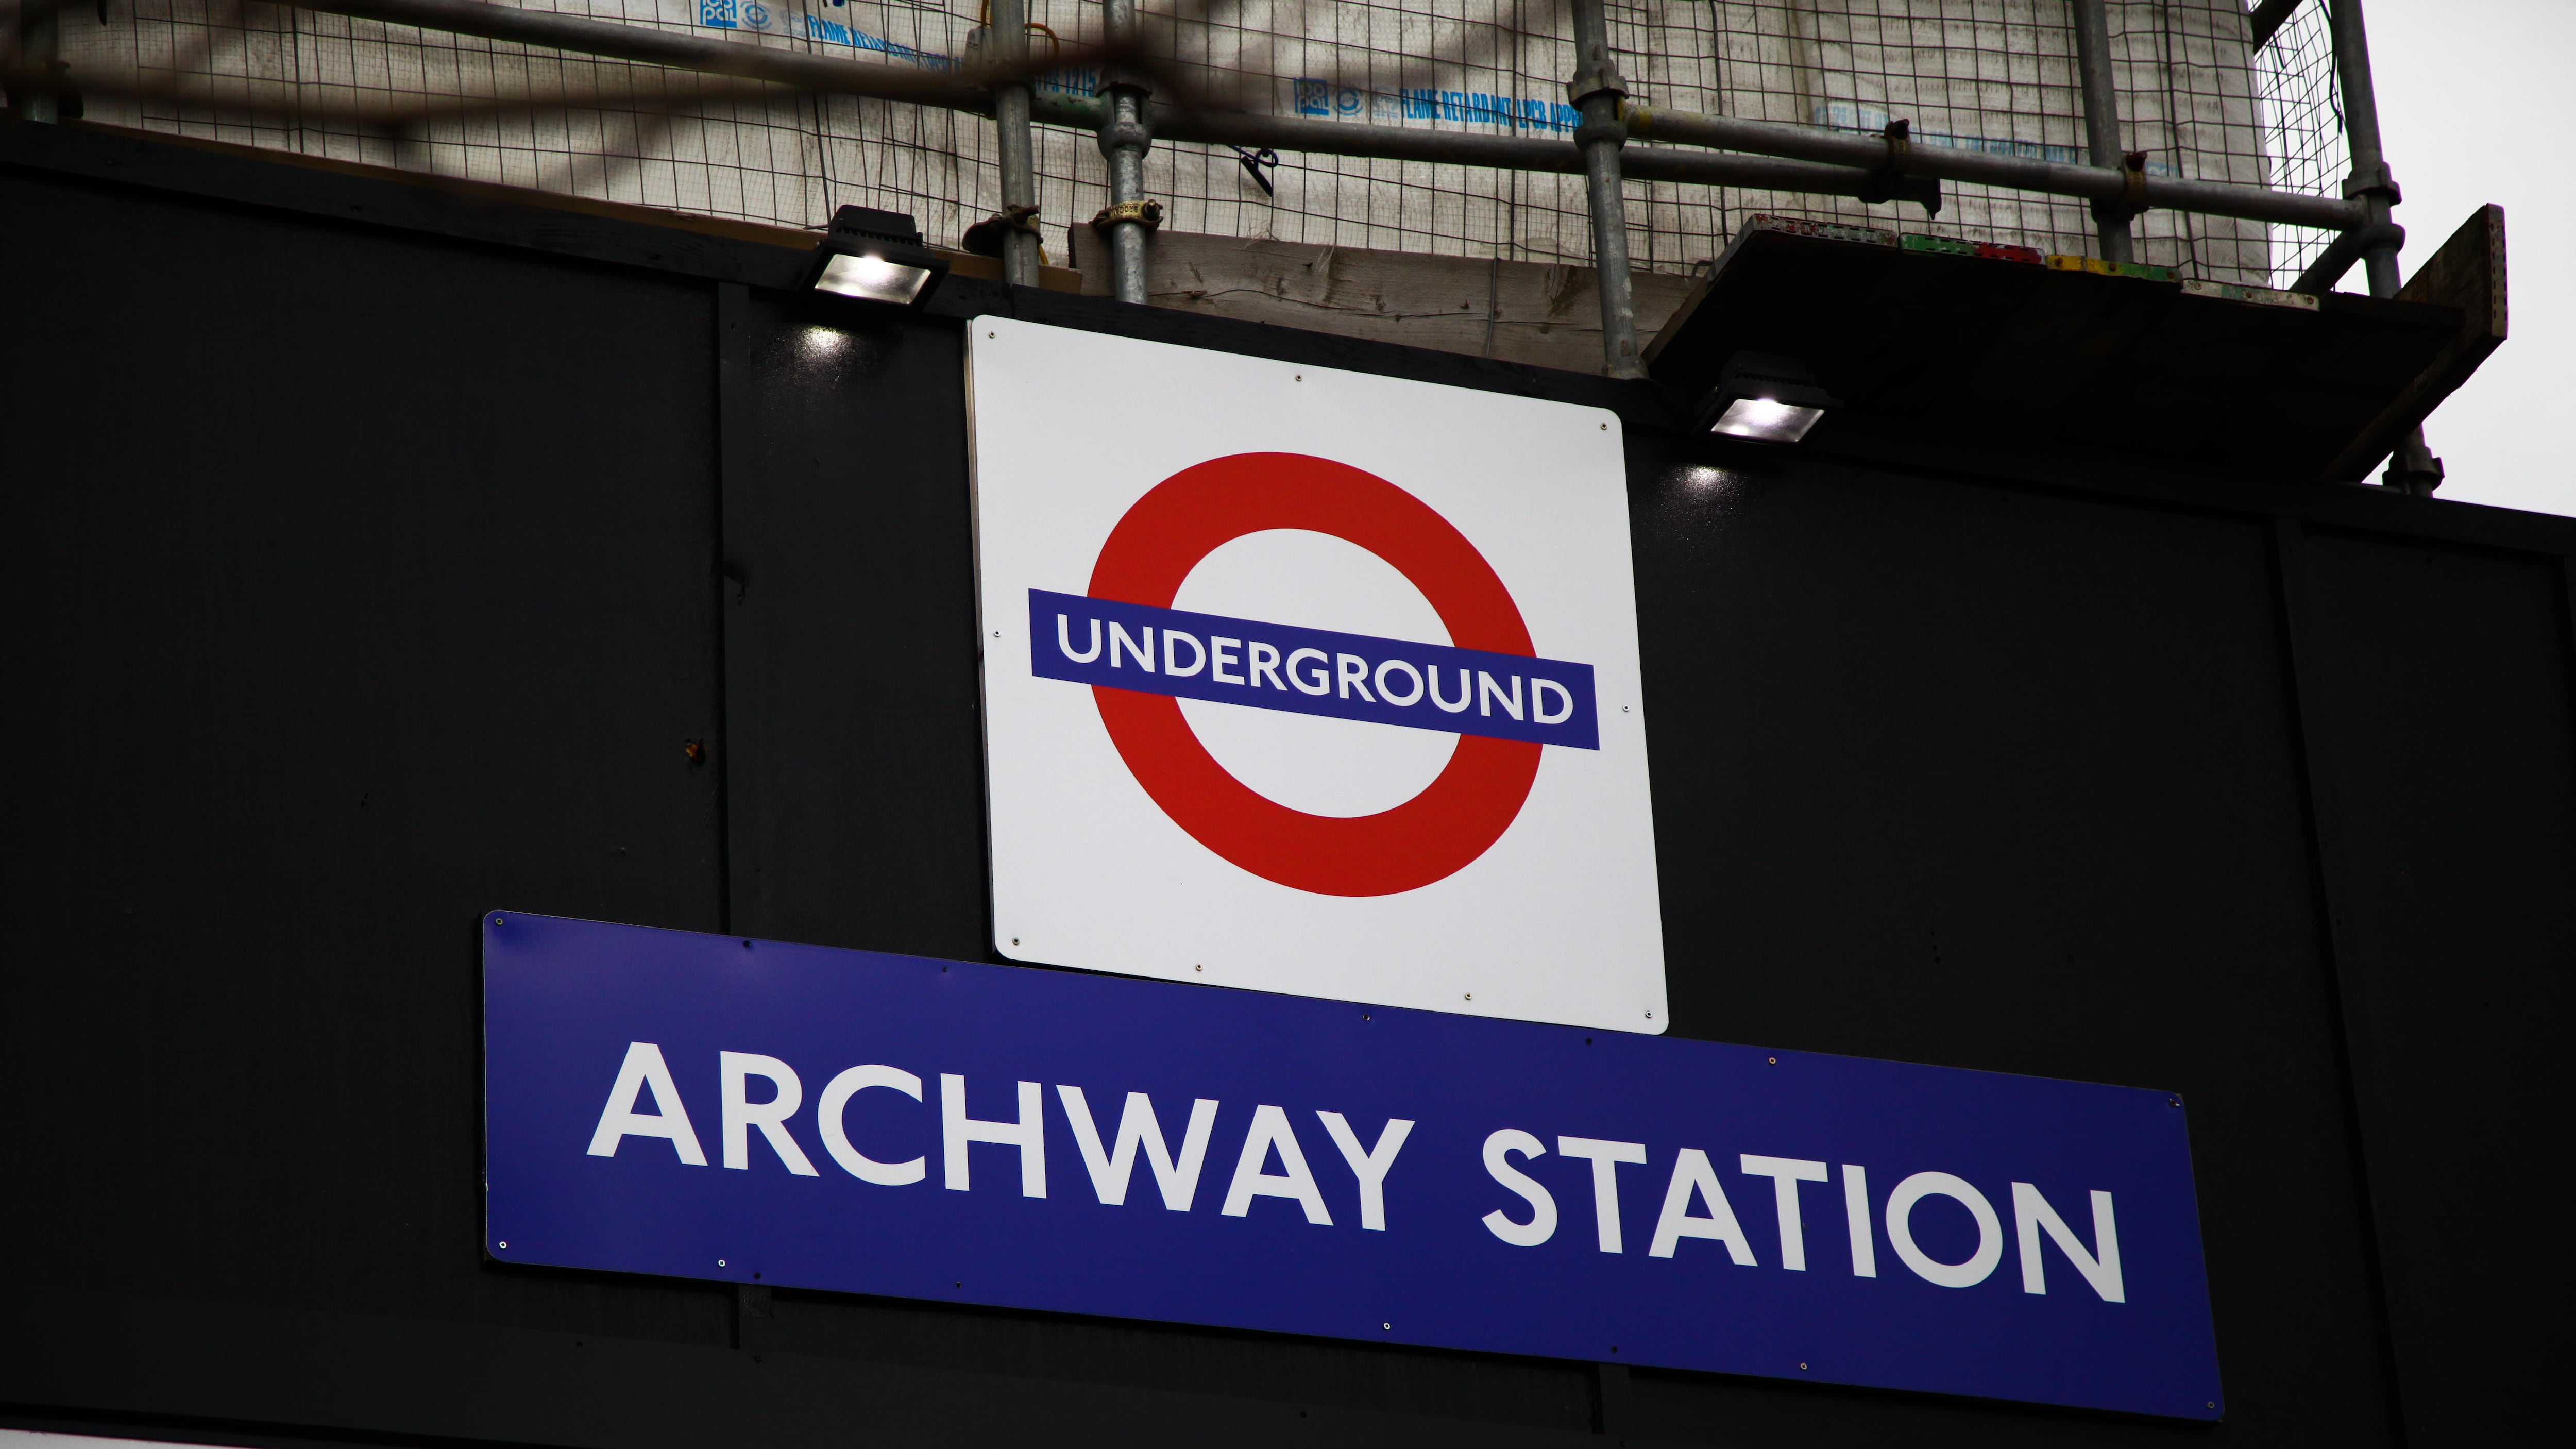 A 101-year-old London Underground passenger was seriously injured after being dragged along a platform when their coat became trapped in a Tube train door